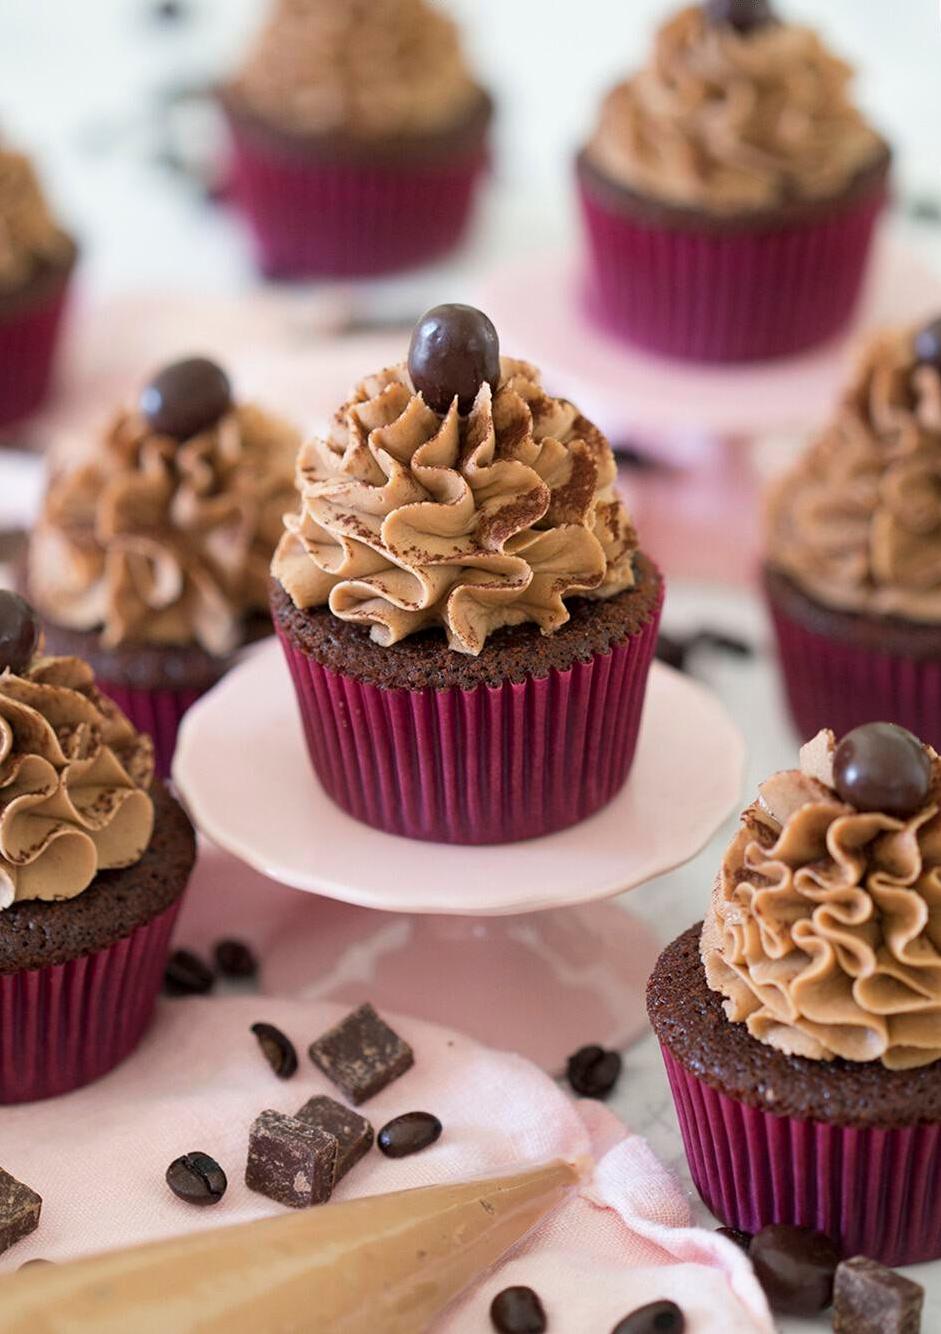  The combination of chocolate and coffee creates pure bliss in our Mocha Cupcakes.